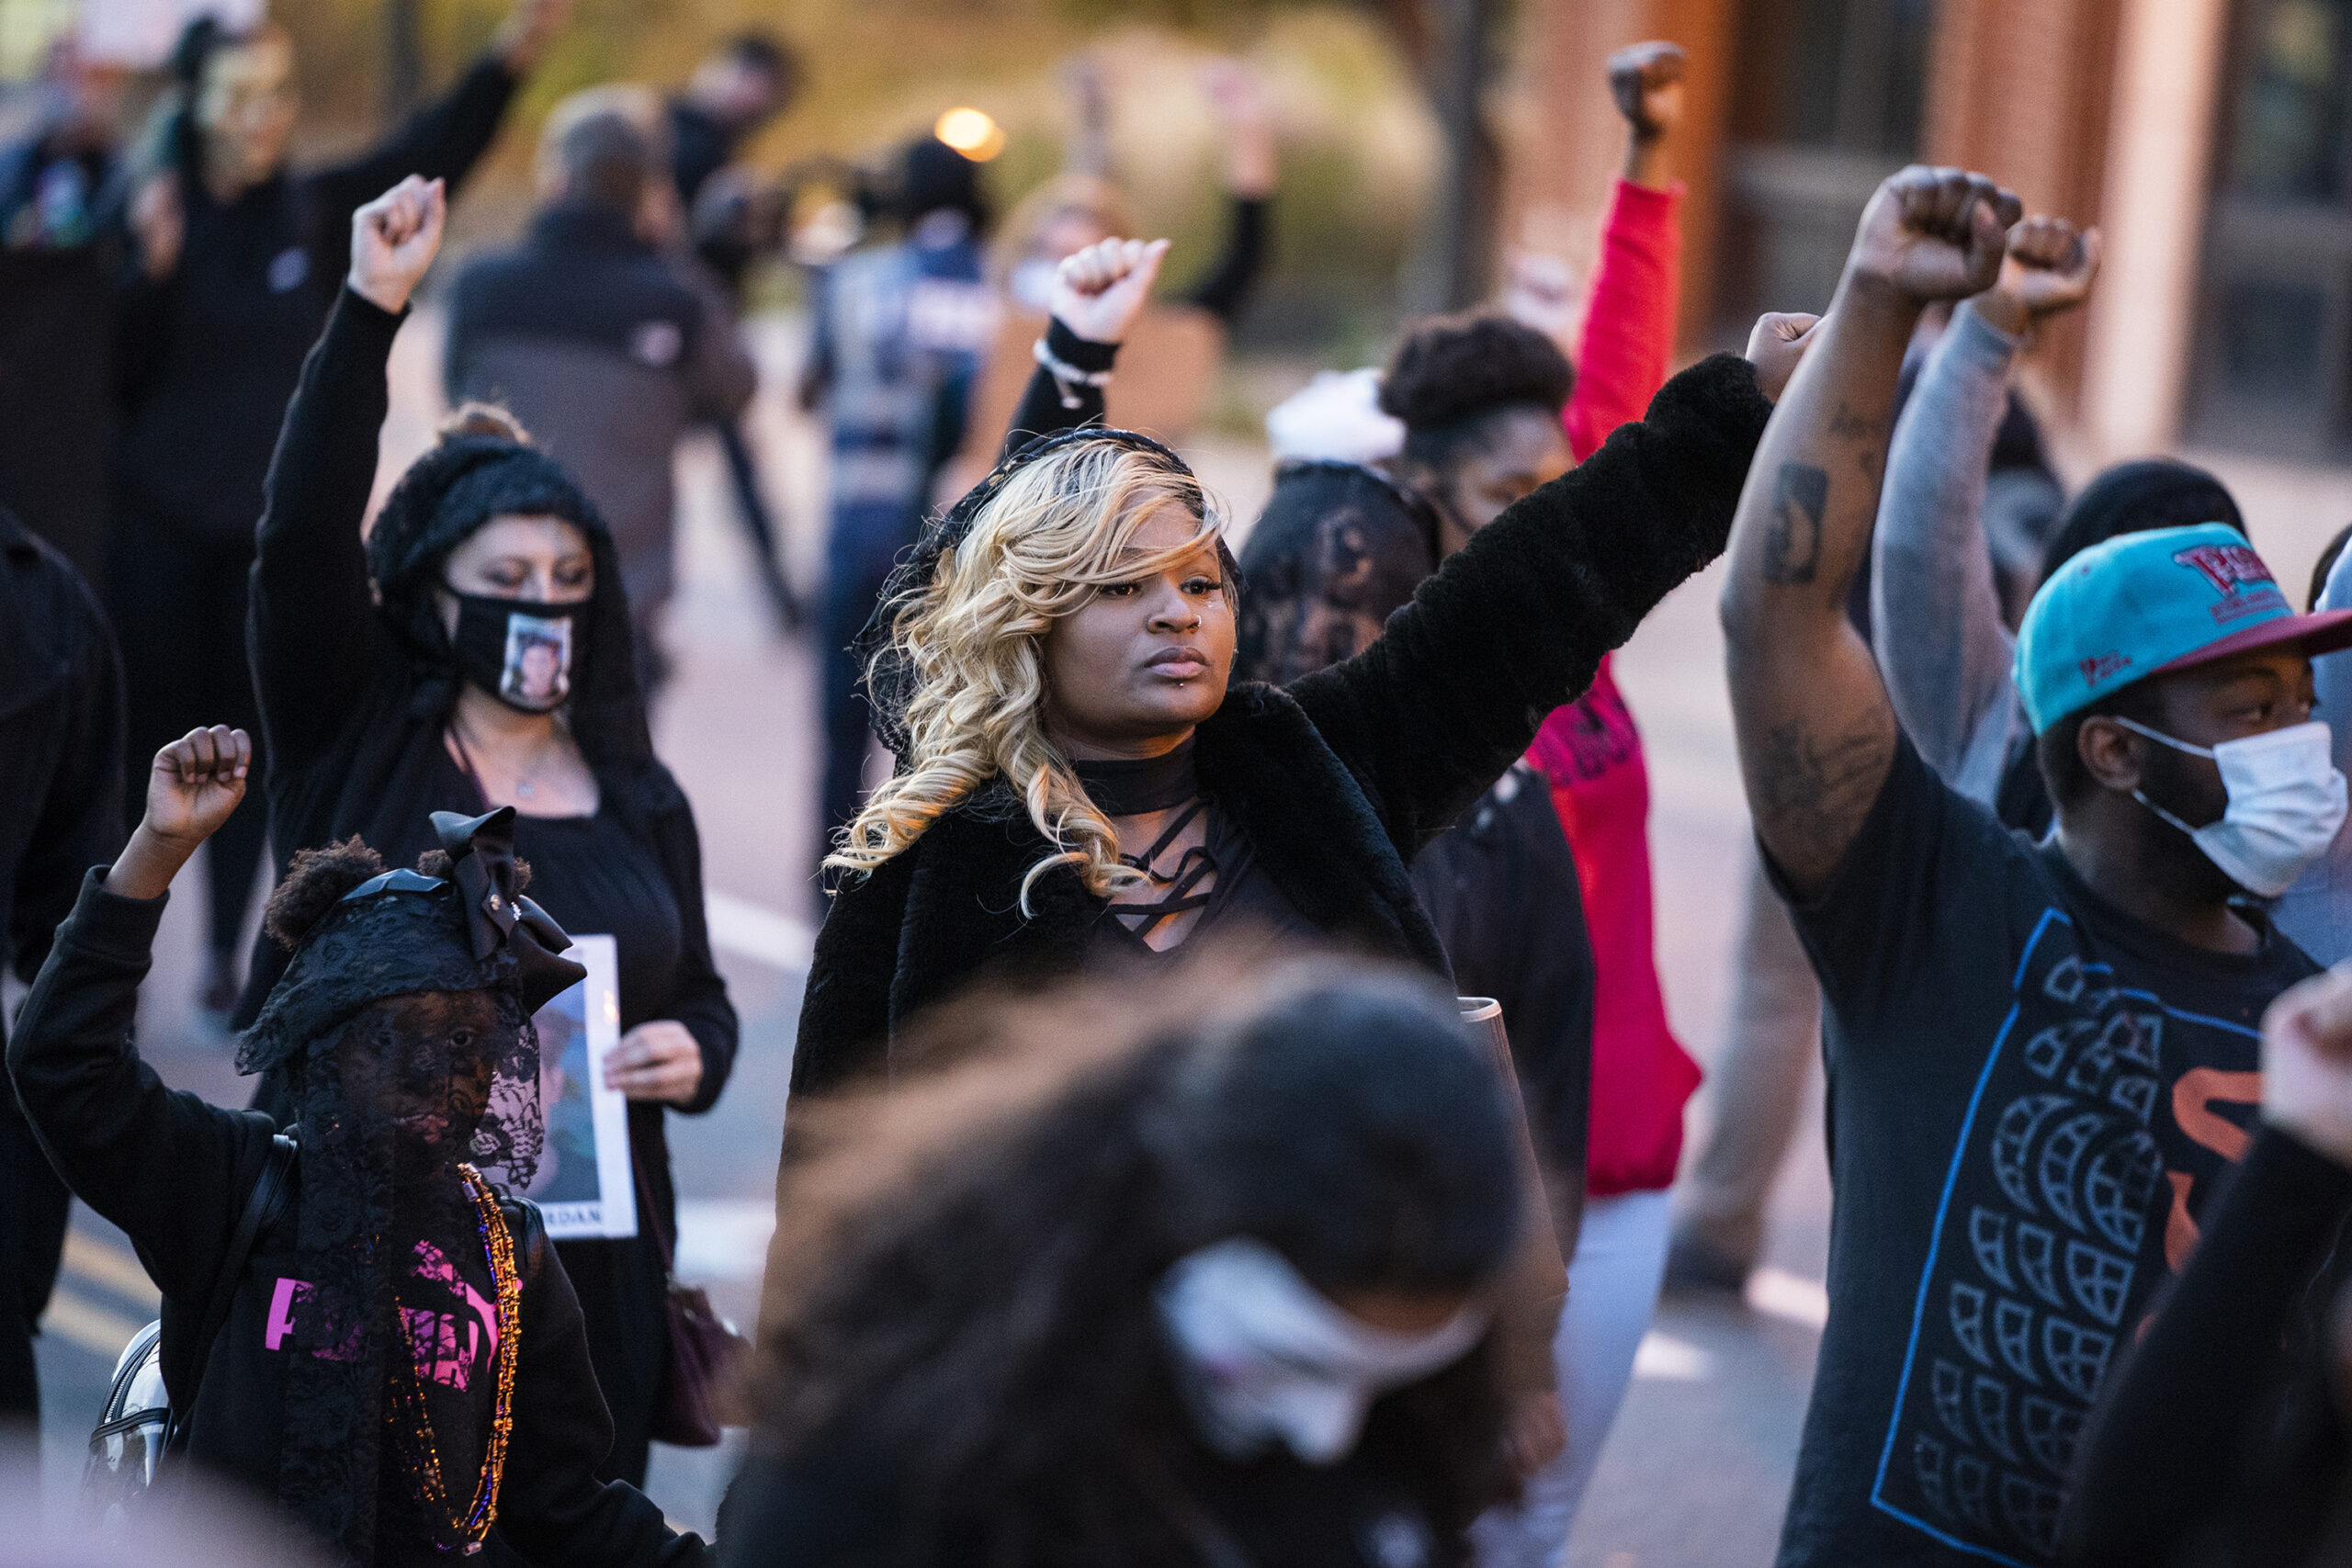 Toshira Garraway, who's sons father Justin Teigen was killed after an encounter with St. Paul Police, participates in "The Secret March" in St. Paul, Minnesota, on Thursday, Oct. 8, 2020, a day after the release of former Minneapolis Police Officer Derek Chauvin, charged with the murder of George Floyd. (Leila Navidi/Minneapolis Star Tribune/TNS)